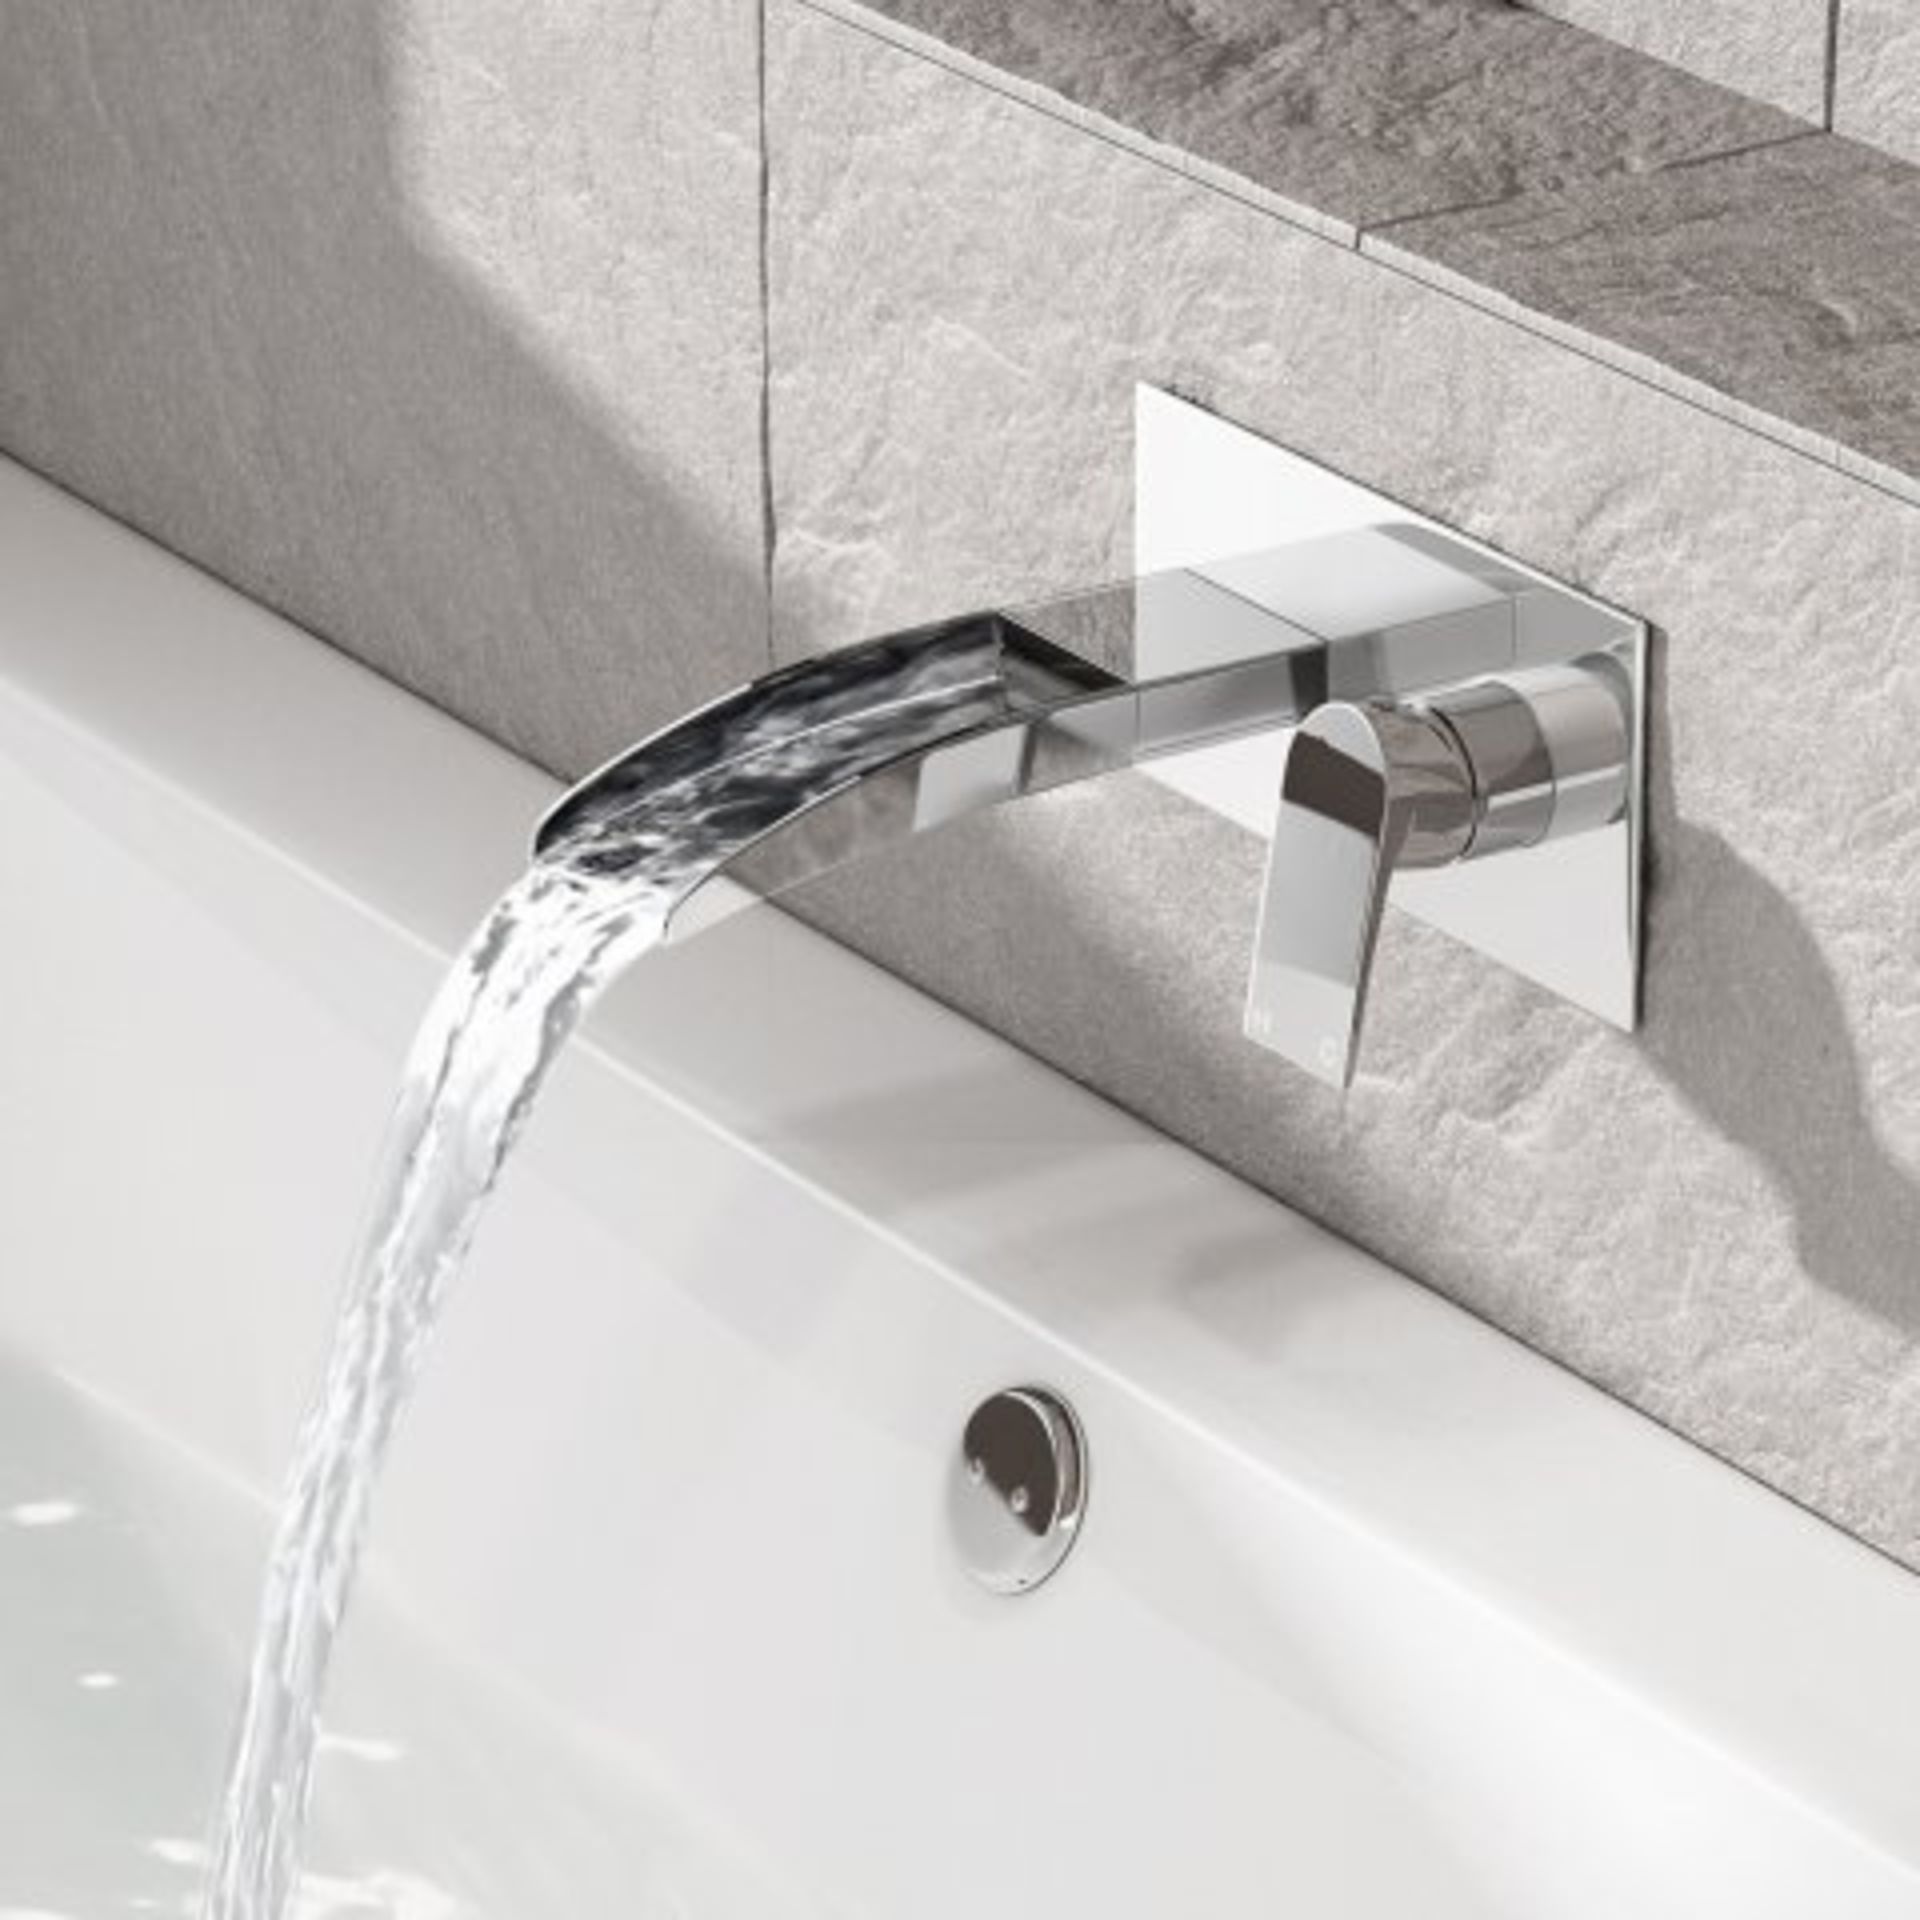 (H39) Avis II Wall Mounted Waterfall Bath Mixer Tap This wall mounted basin taps adds a touch of